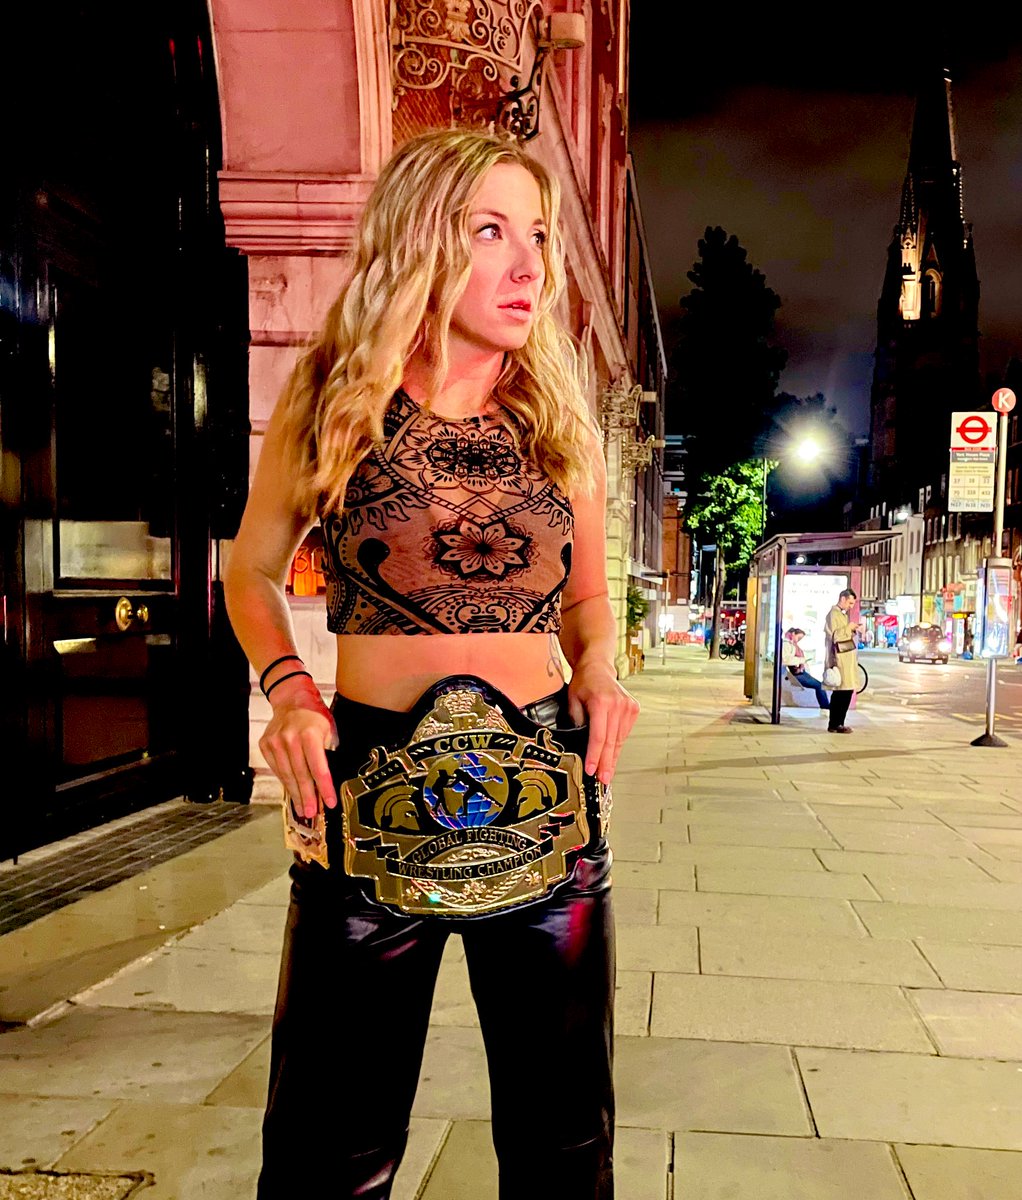 The question isn’t who will let me; It’s who’s will stop me? 😏 @CCWAction #Globalfightingchampion